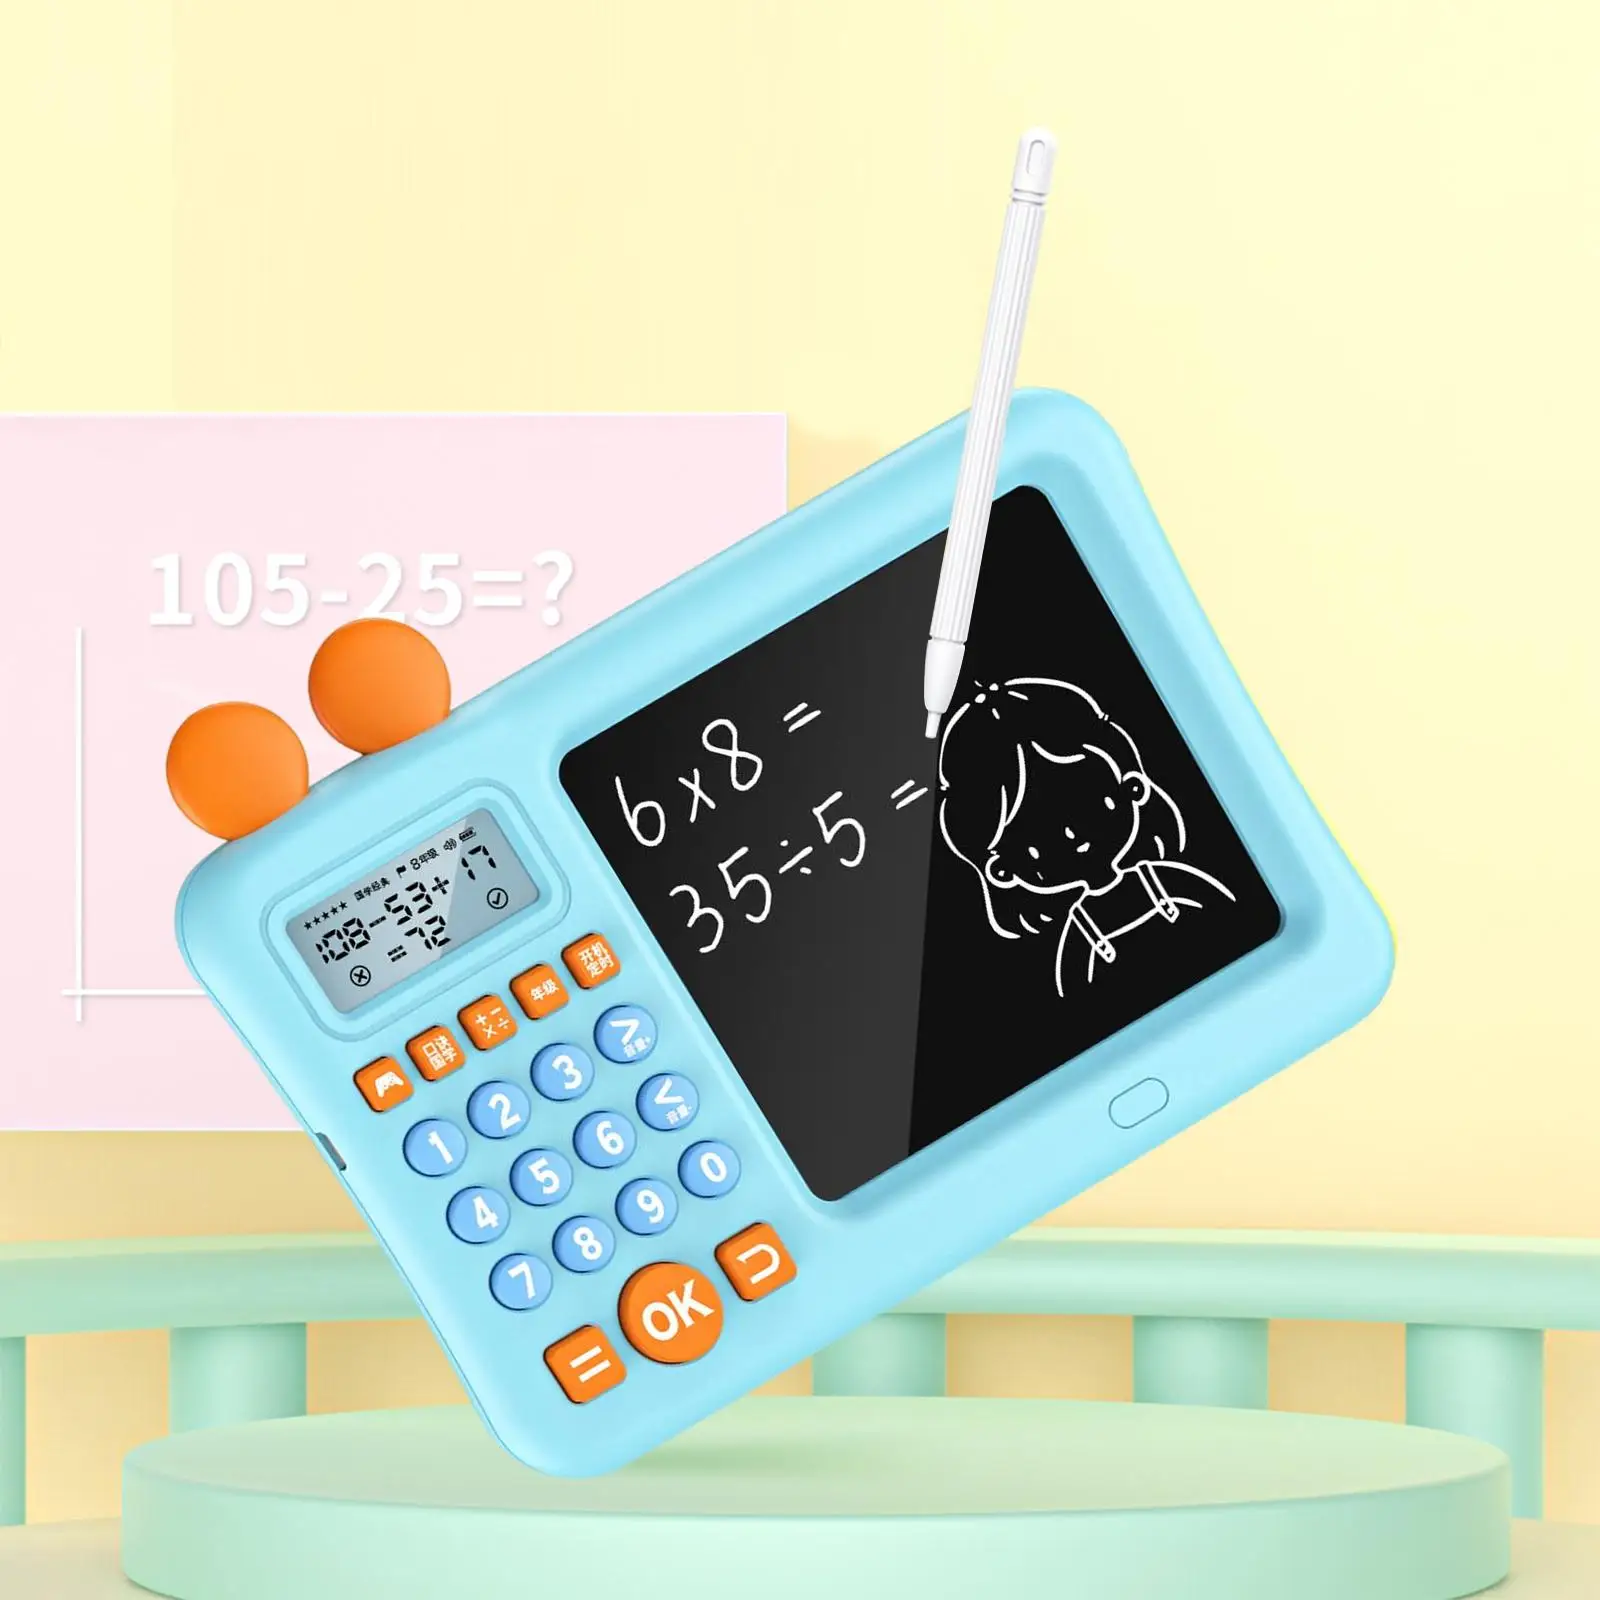 Maths Teaching Calculator Mathematics Learning Aids with Writing Board Math Trainer Early Math Educational Toy for Toddler Kids